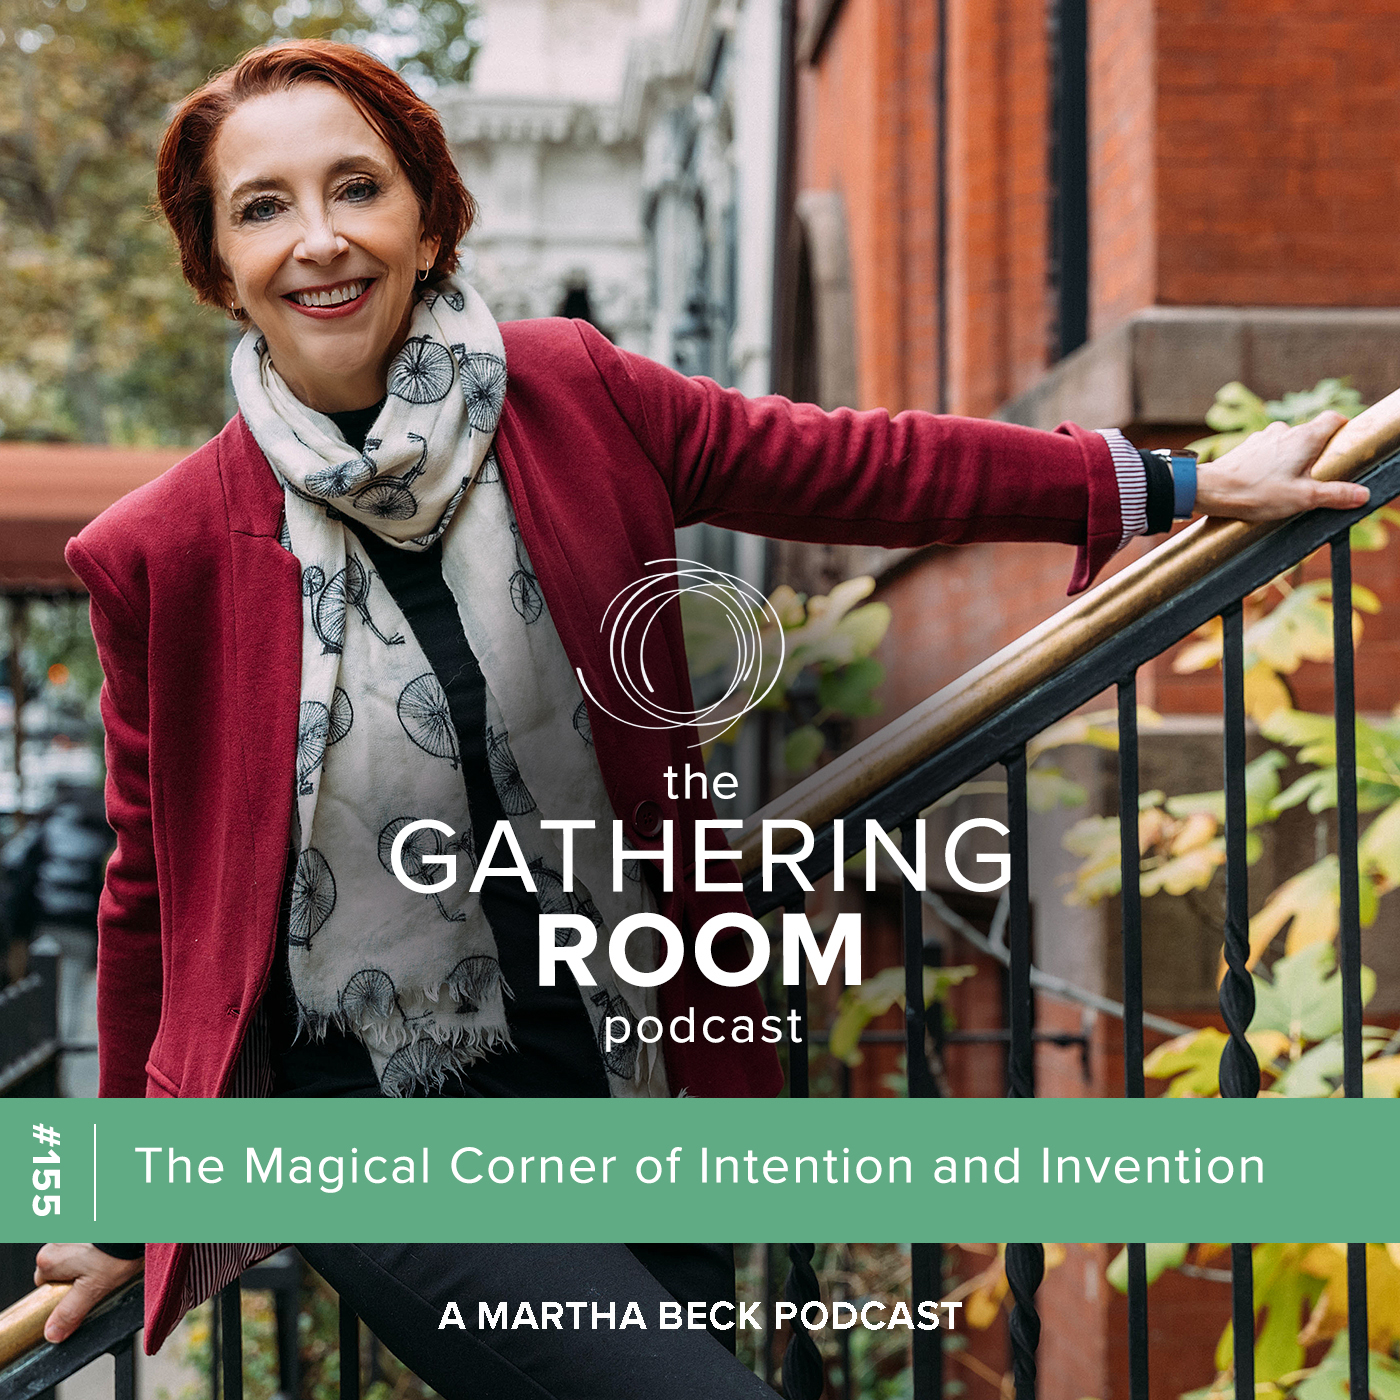 Image for The Gathering Pod A Martha Beck Podcast Episode #155 The Magical Corner of Intention and Invention